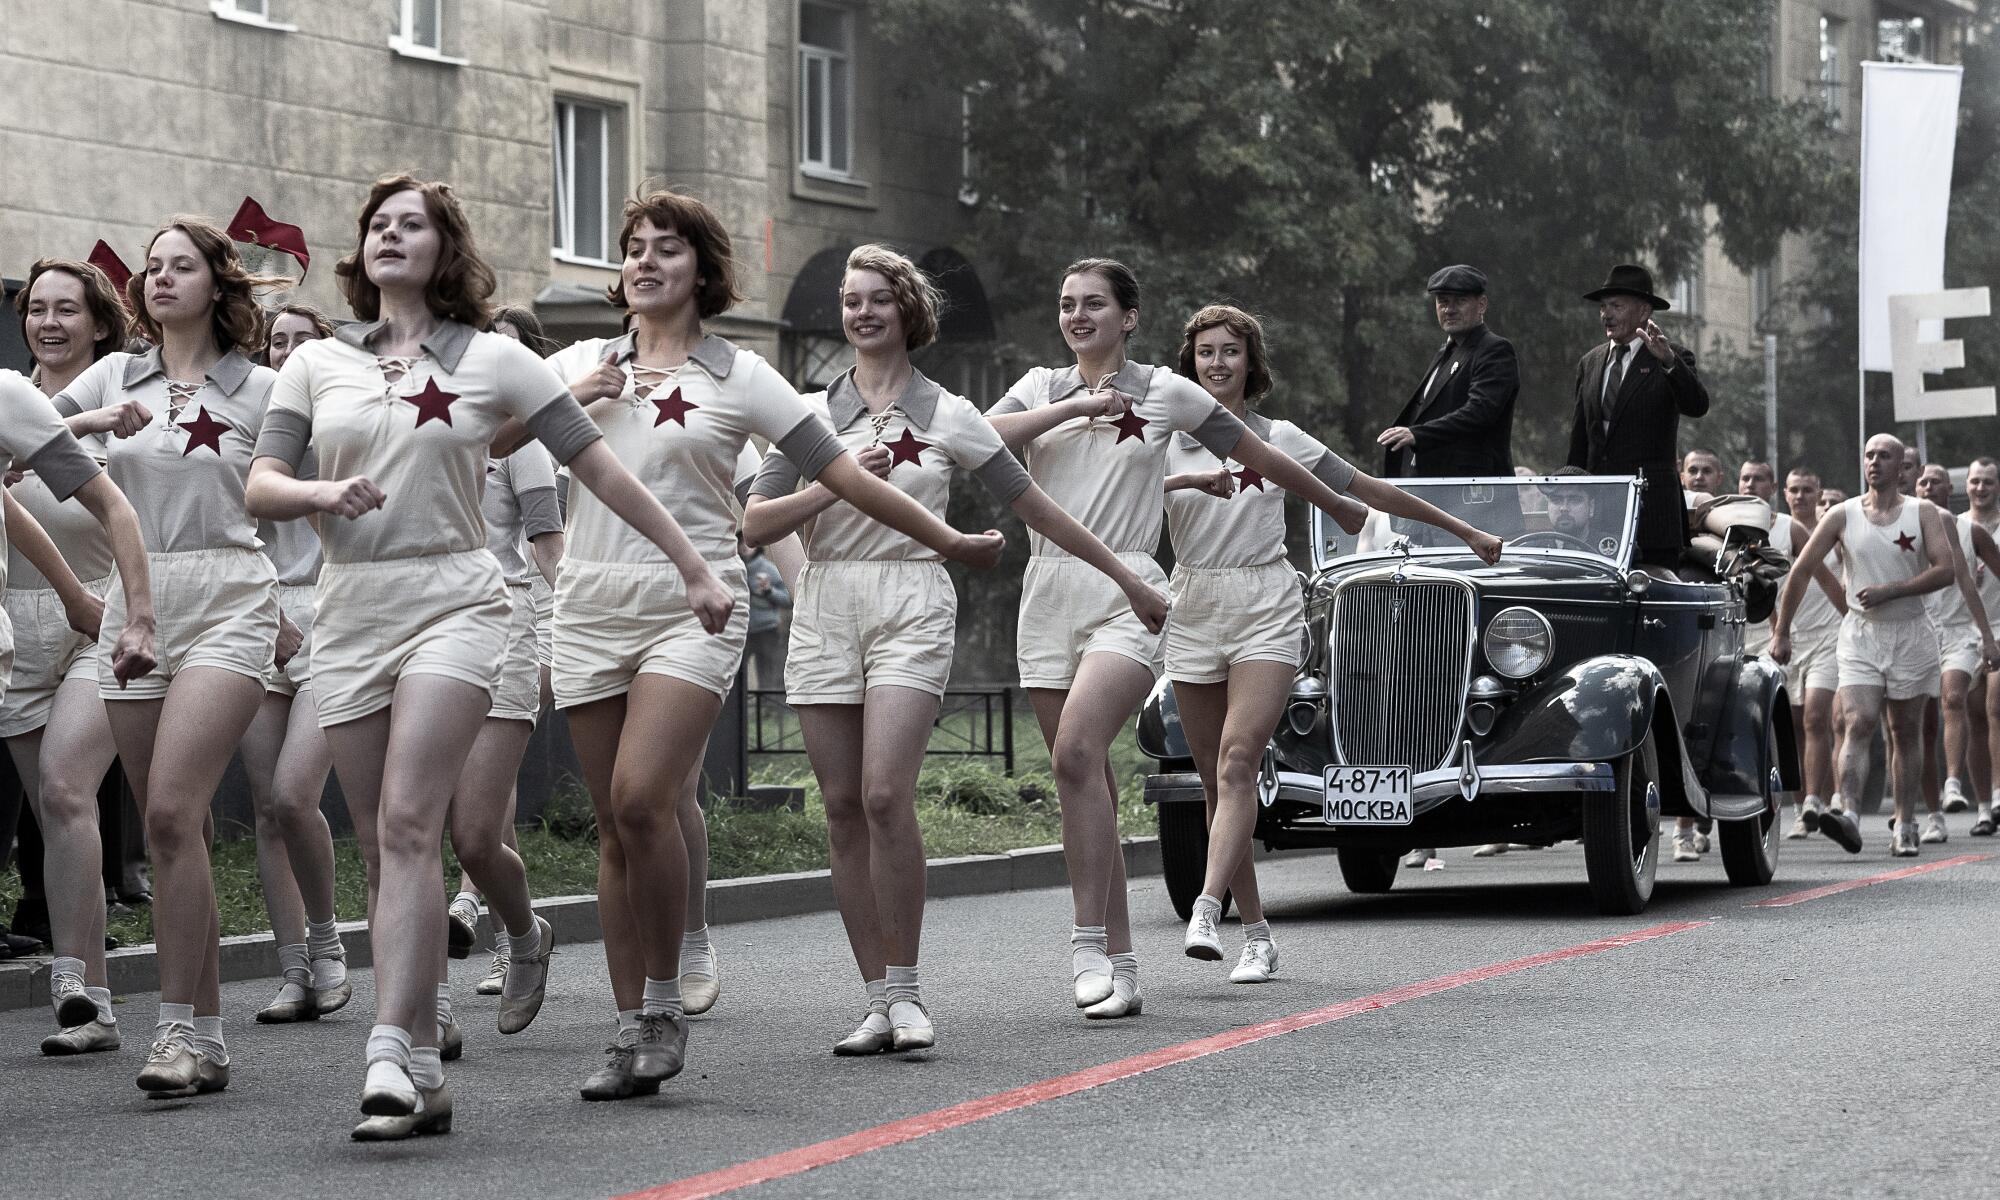 Women in white athletic outfits march in front of a car and marching men.